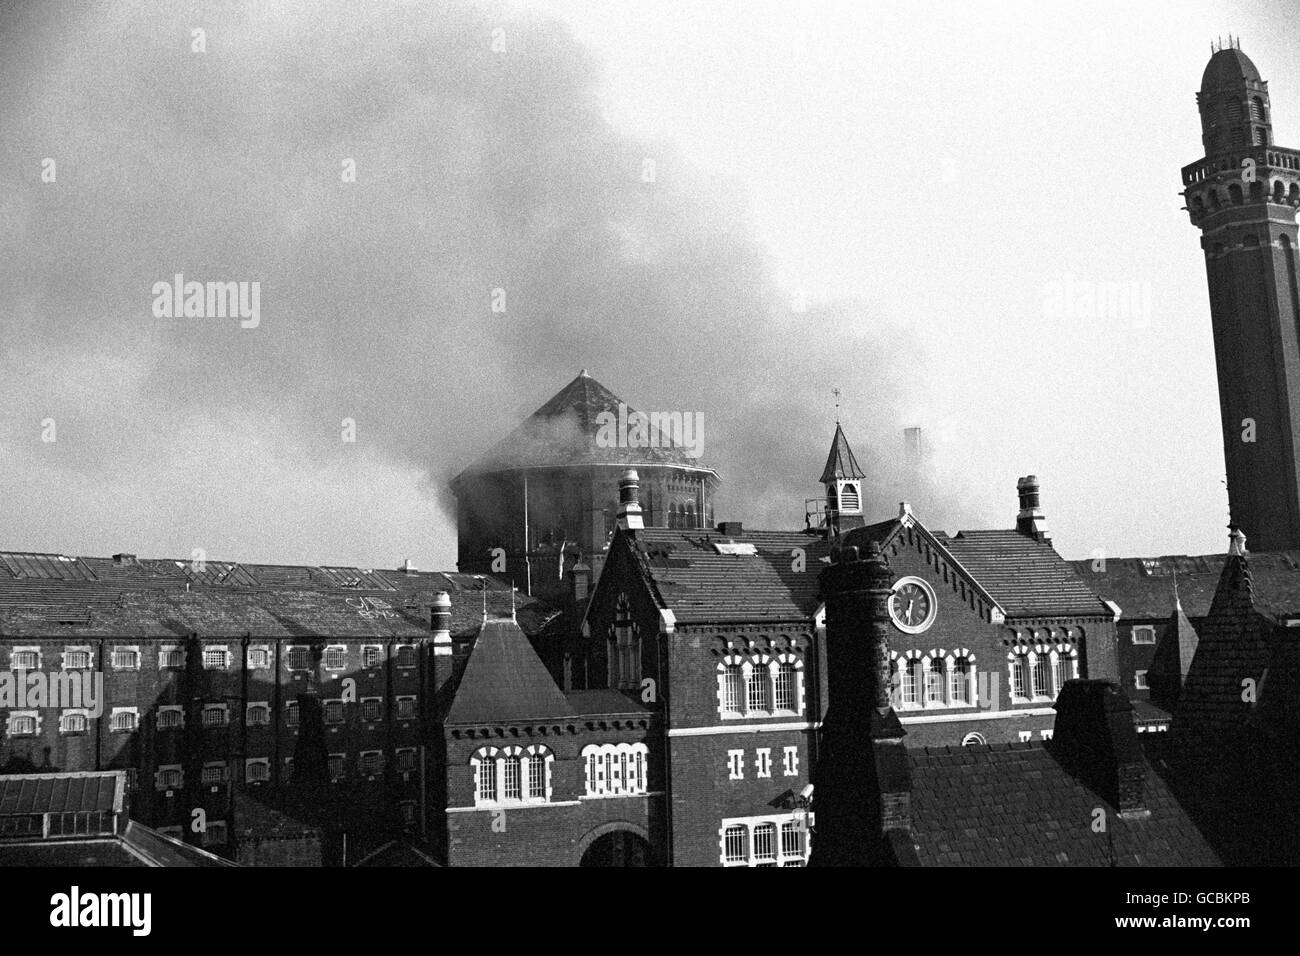 Smoke billows from the roof of Strangeways Prison in Manchester after inmates apparently set fire to debris piled inside. Stock Photo